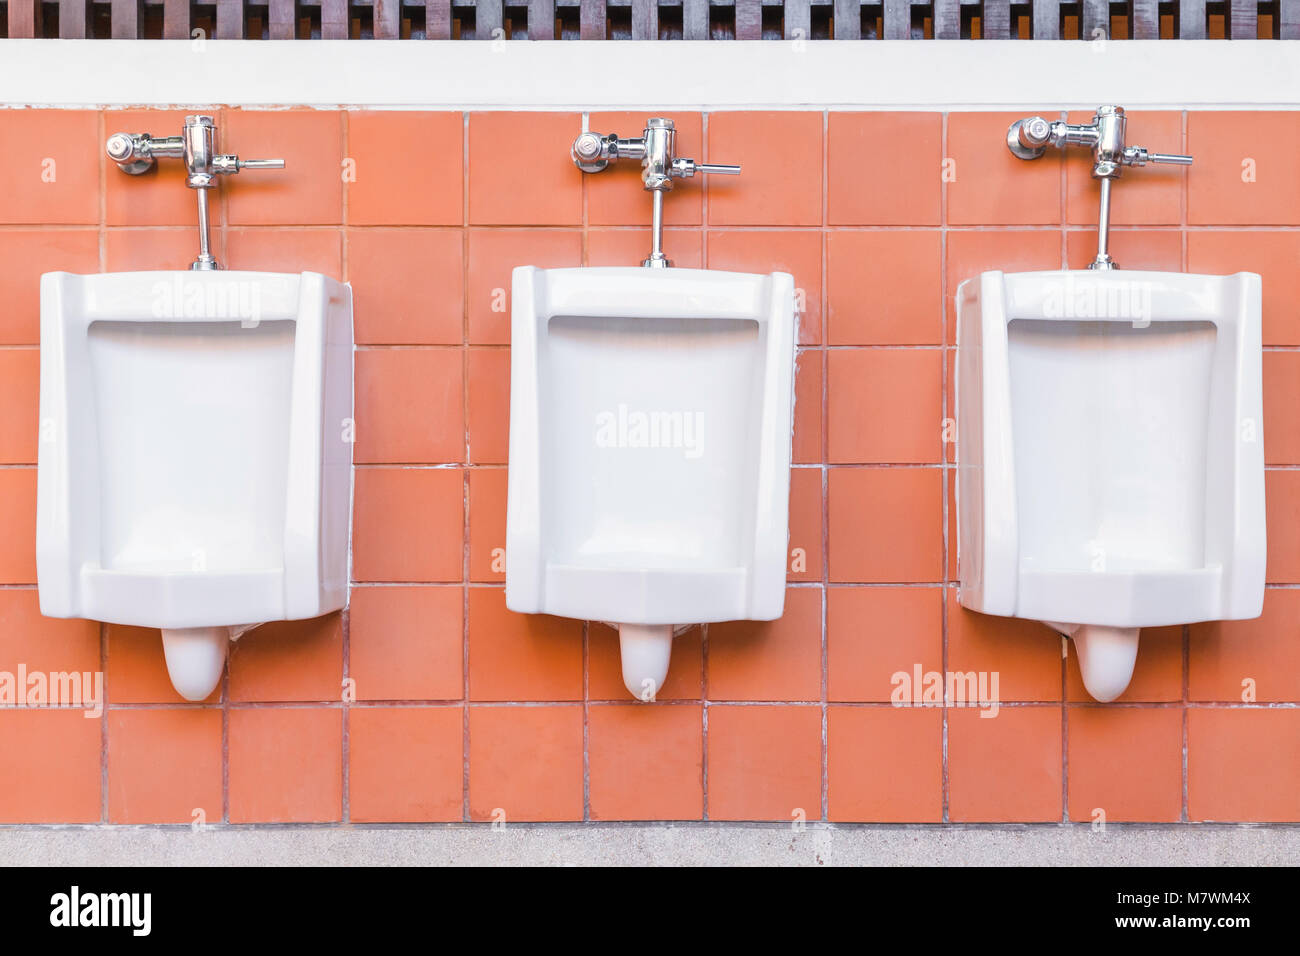 Toilet of man. Tiles wall in the toilet of man with many urinal. Interior  of toilet with urinal in the public toilet. Design of white ceramic urinal  Stock Photo - Alamy